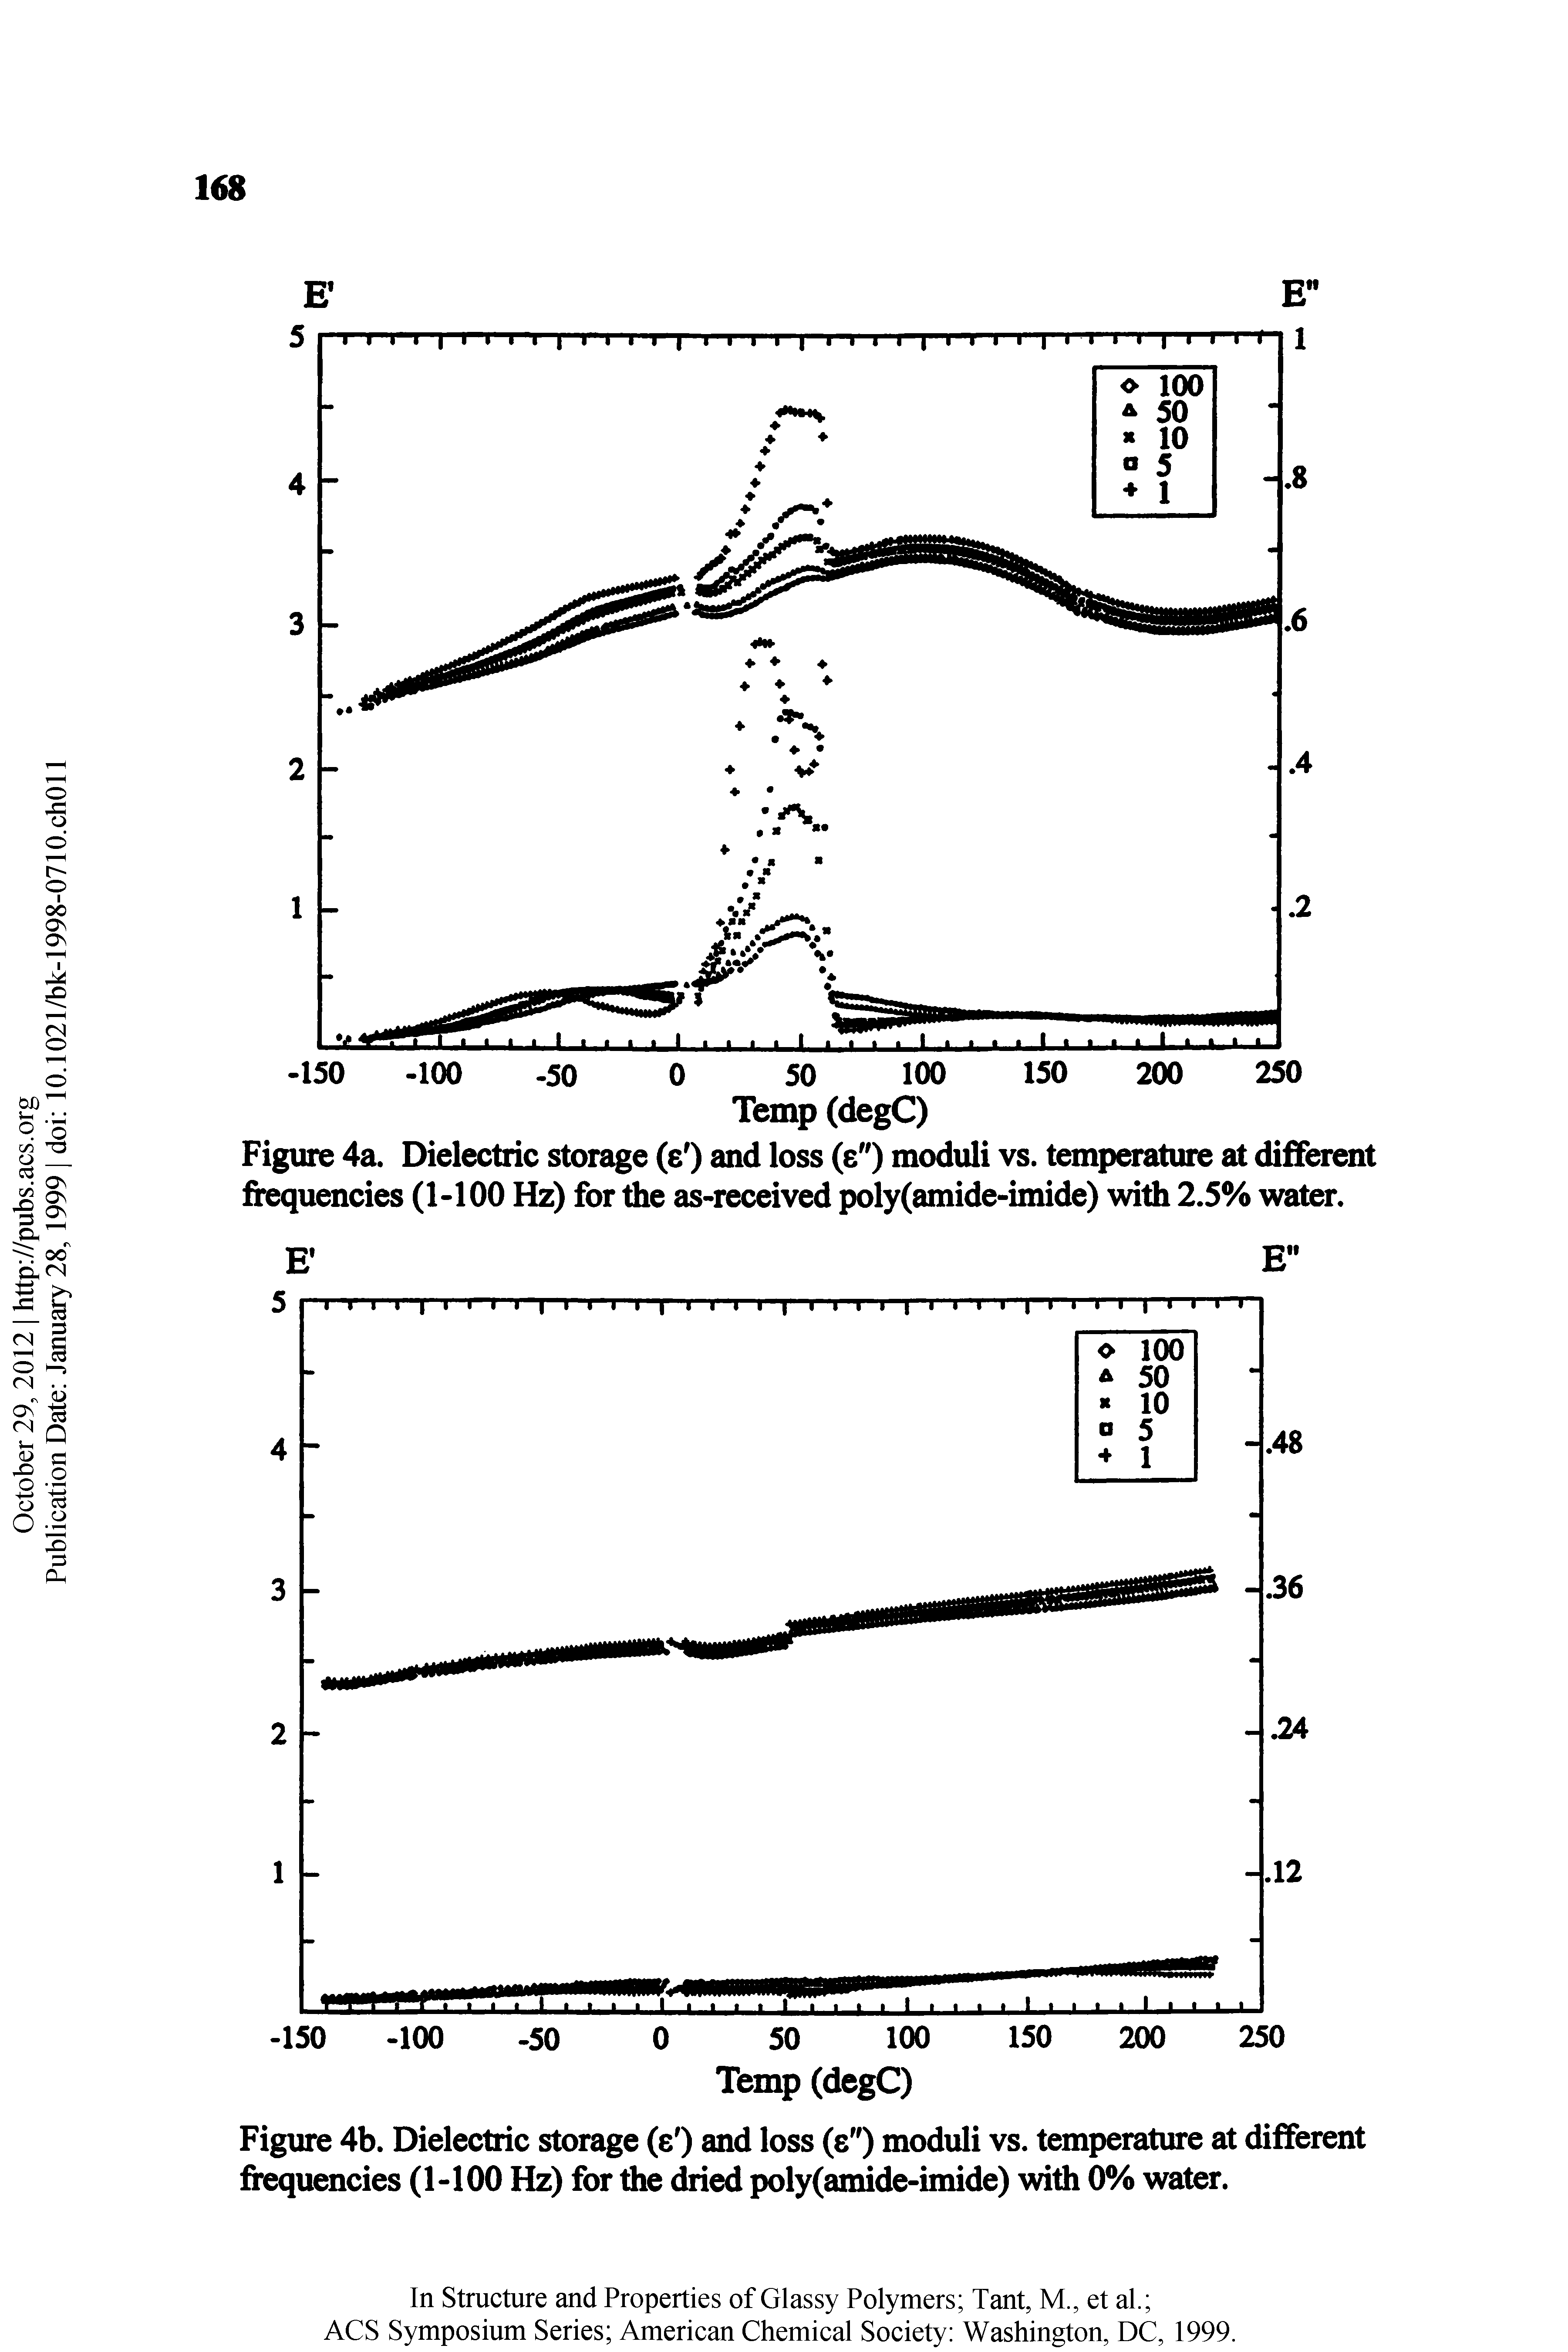 Figure 4a. Dielectric storage (s ) and loss (e") moduli vs. tempoature at different frequencies (1-100 Hz) for the as-received poly(amide-imide) with 2.5% water.